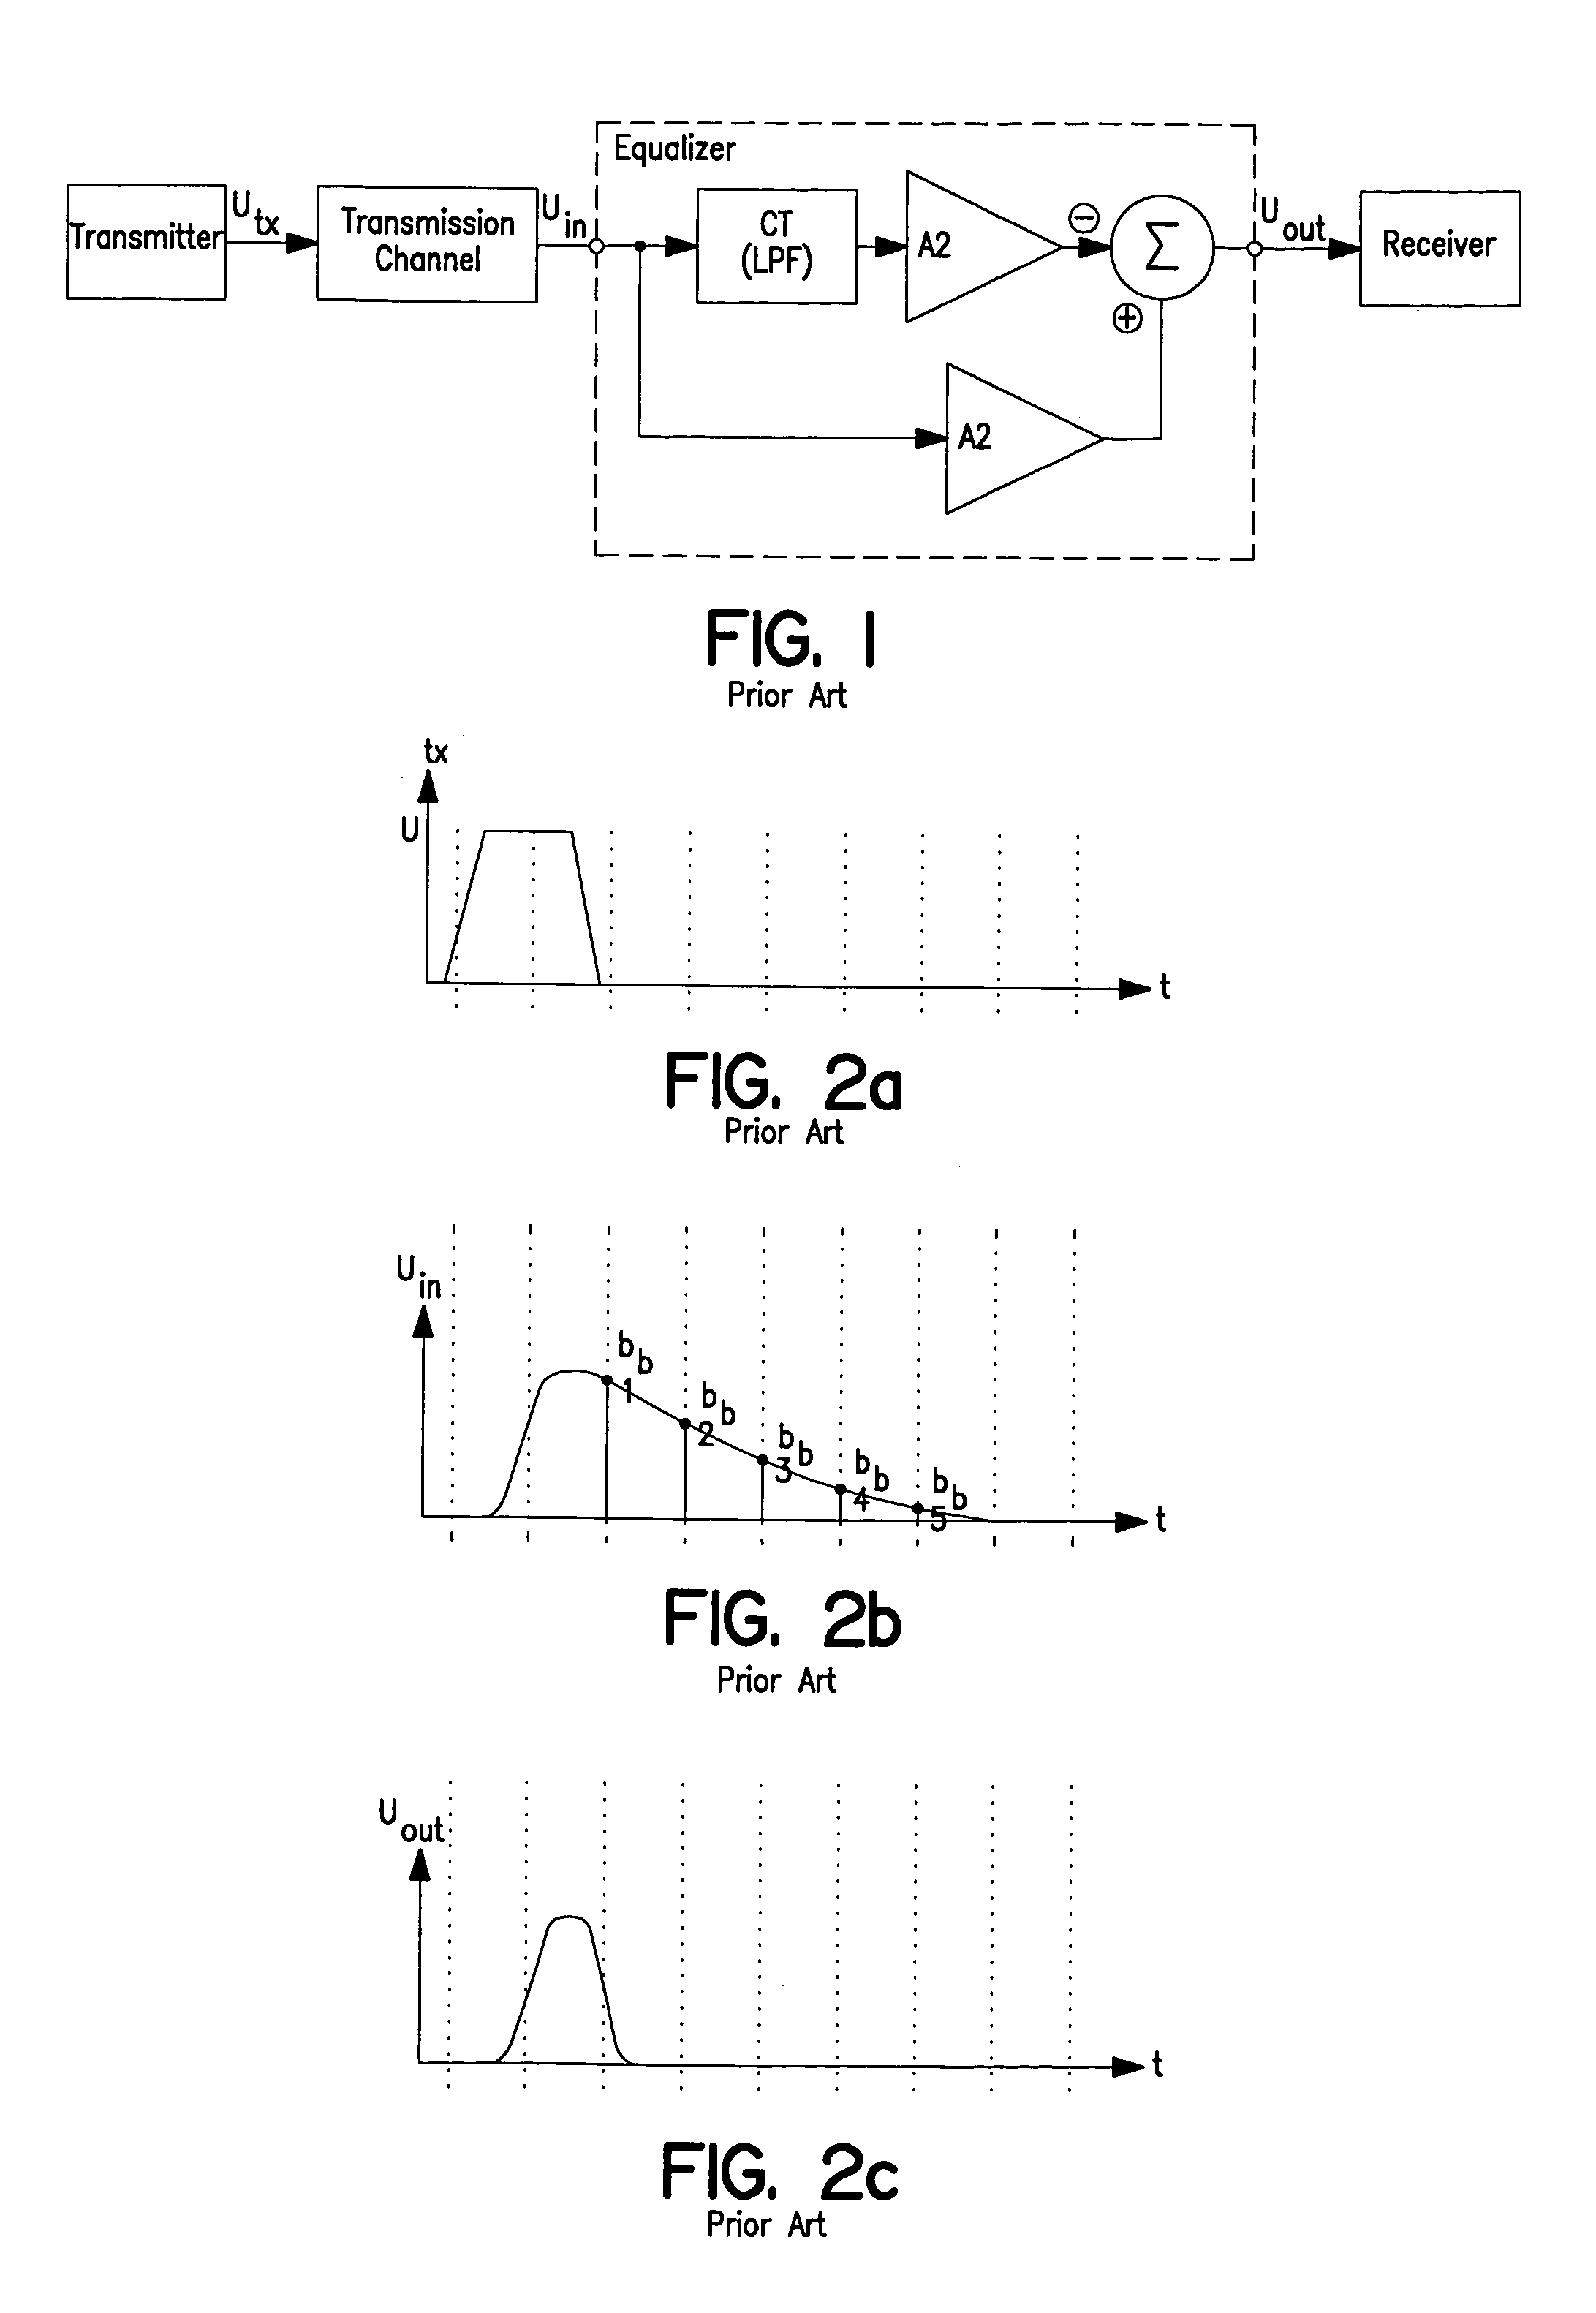 Feed forward equalizer and a method for analog equalization of a data signal